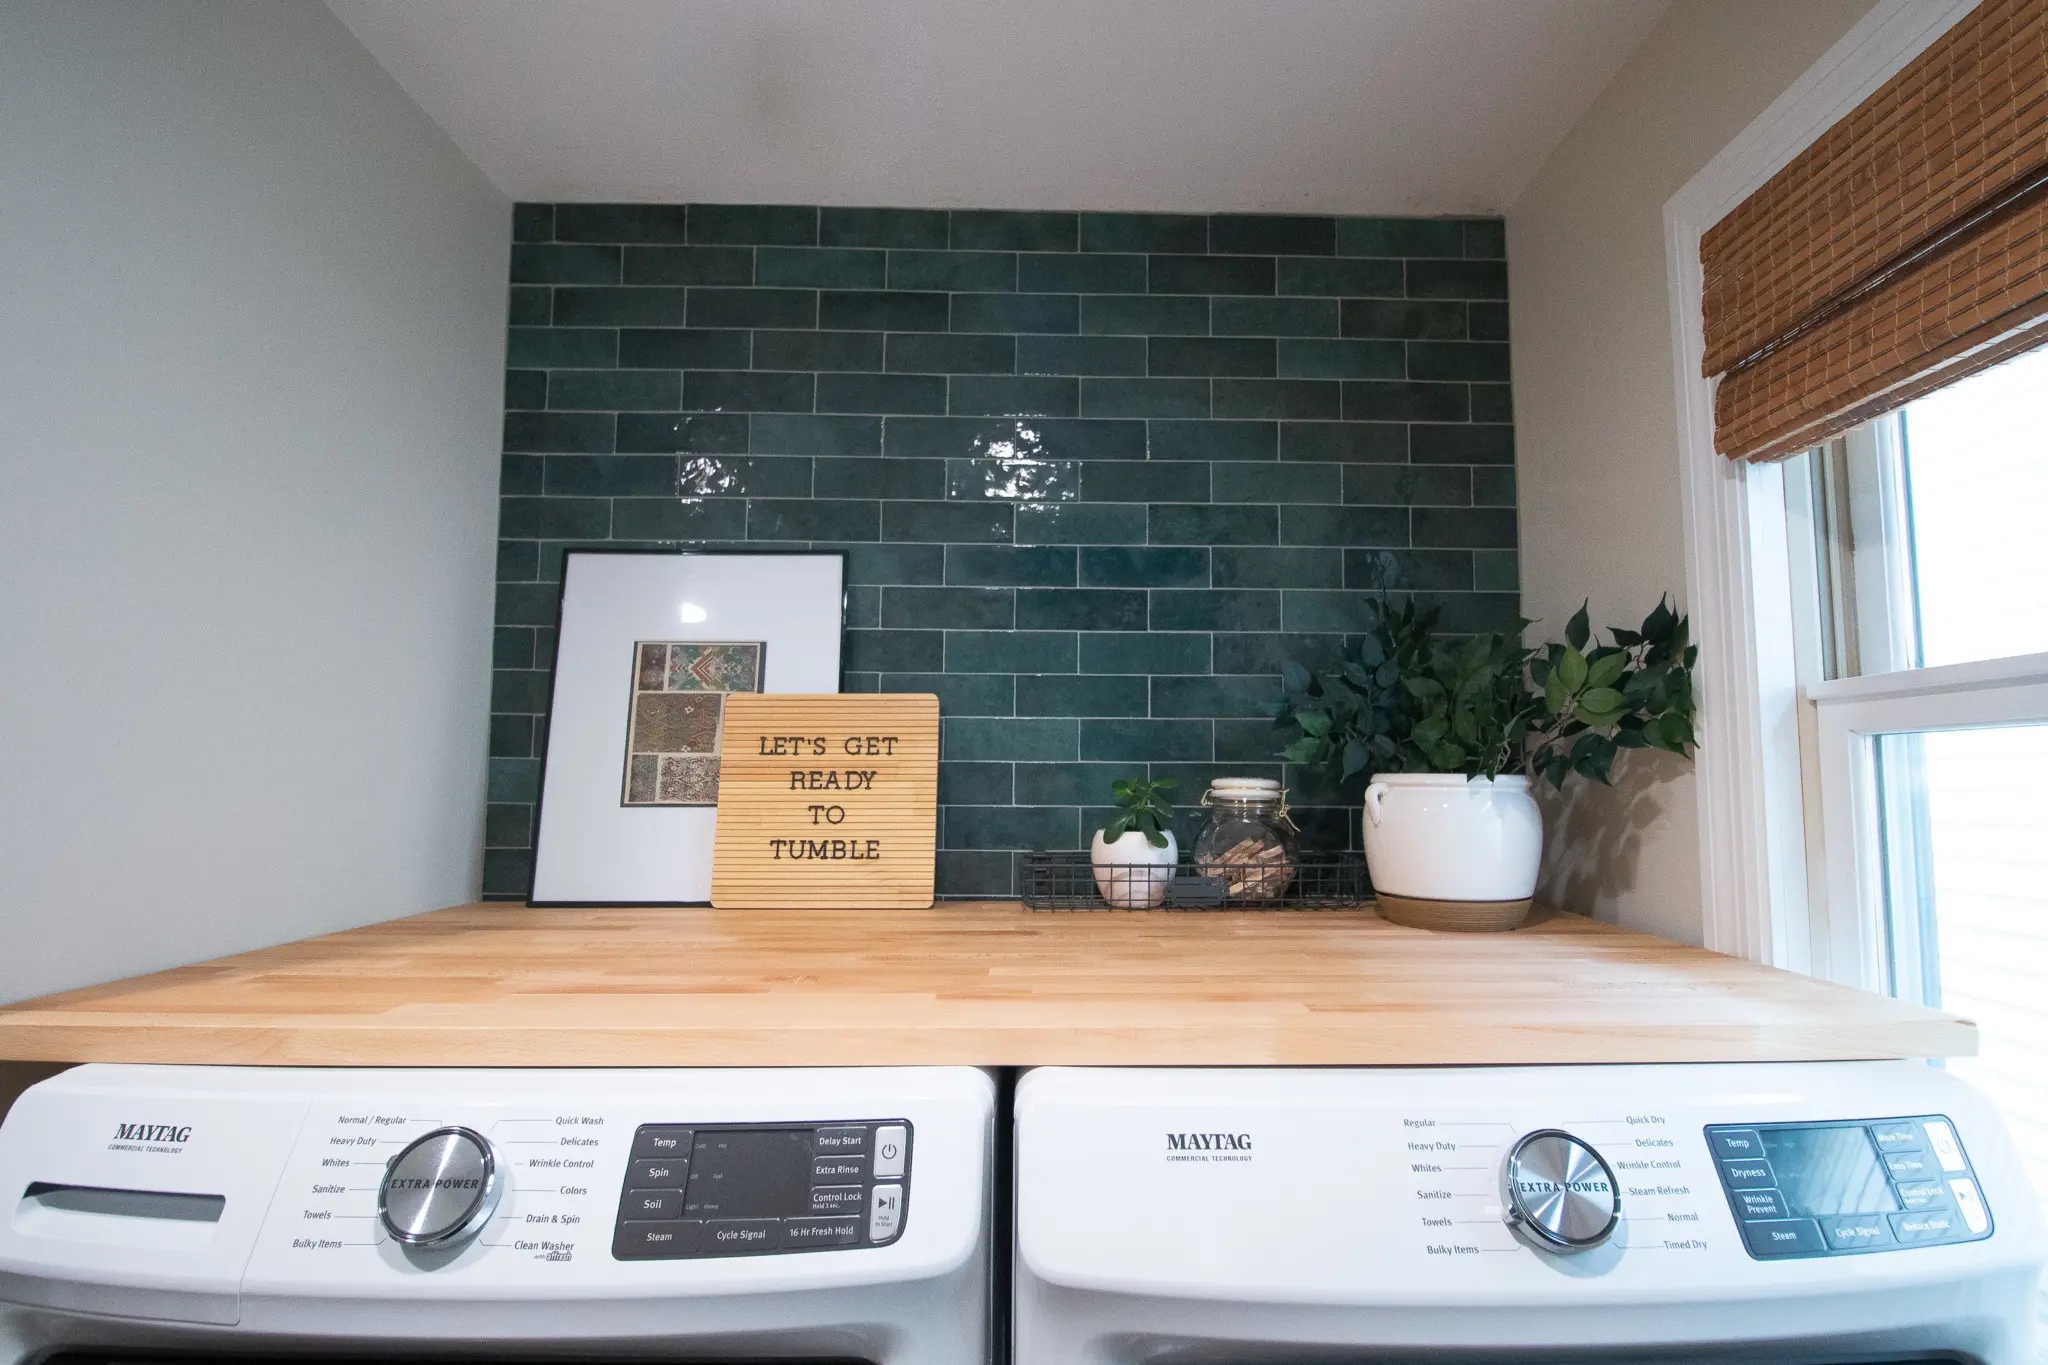 Adding green tile over a washer and dryer